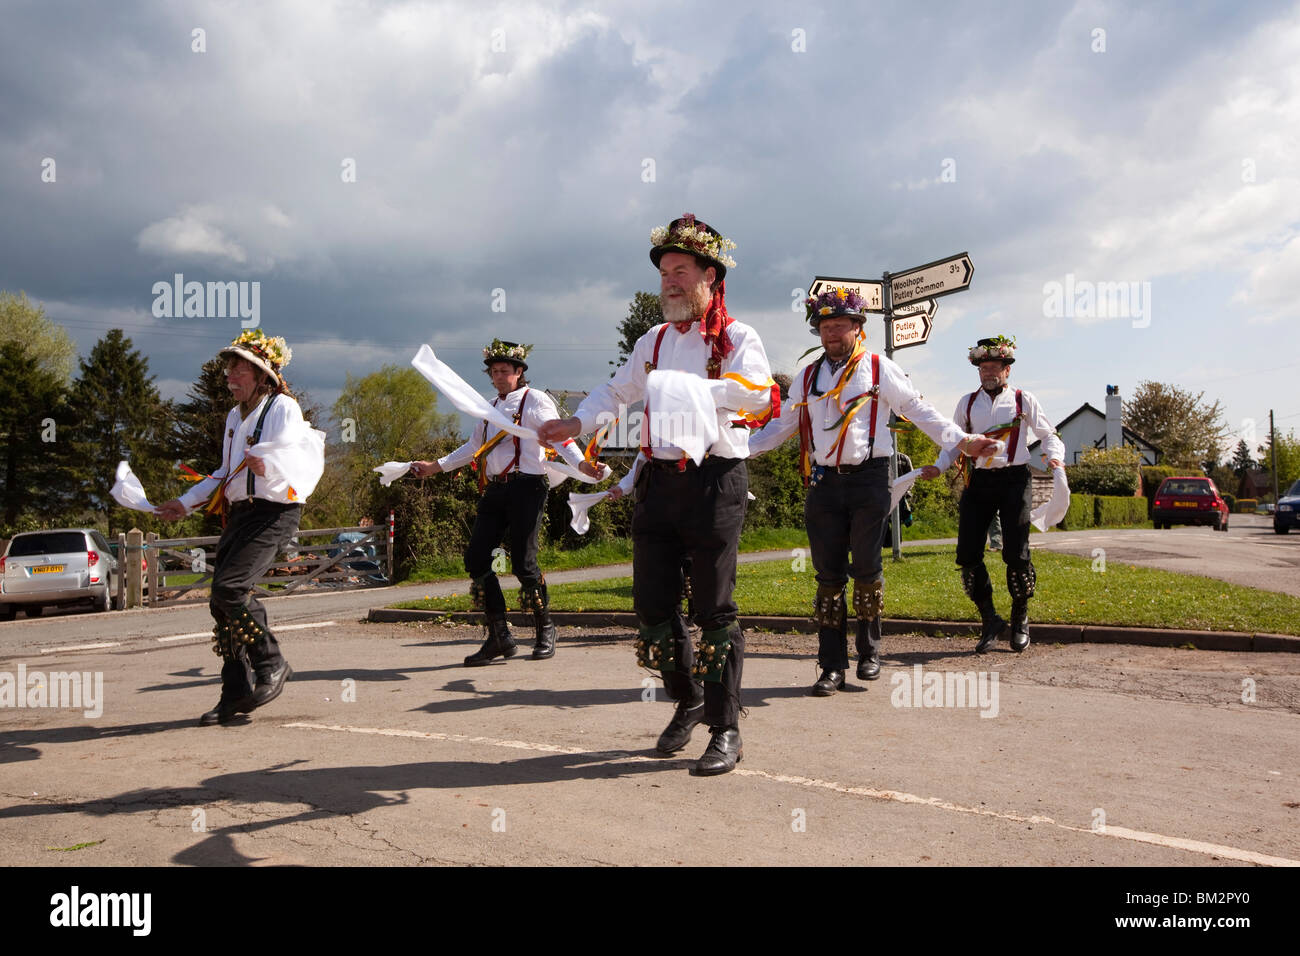 UK, England, Herefordshire, Putley, Big Apple Event, Morris men dancing on village green as rain storm aproaches Stock Photo